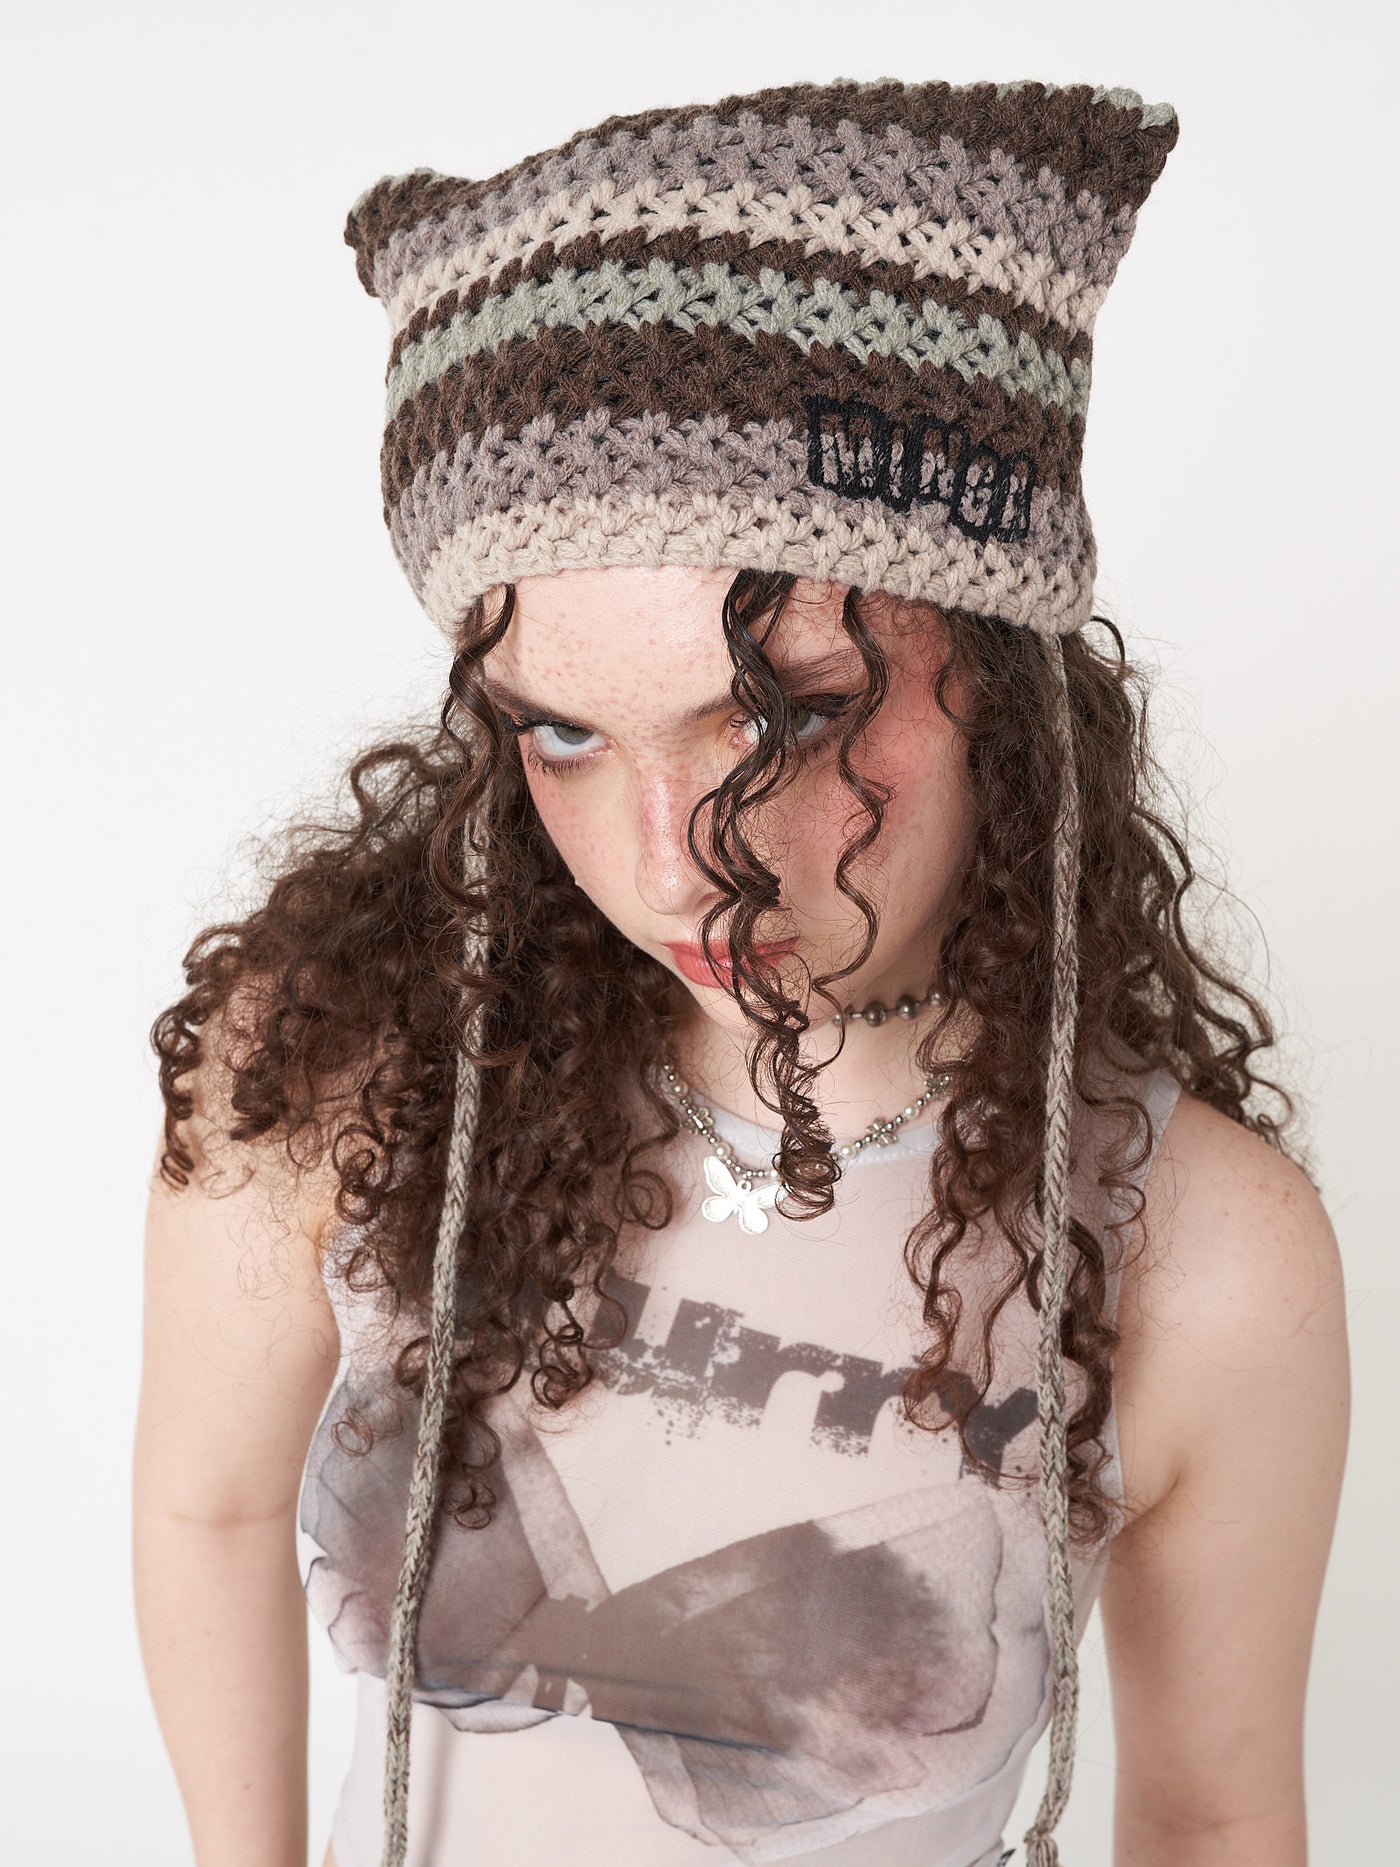 Knitted tie hat with all over stripes in green, brown and beige matching crochet style pattern 